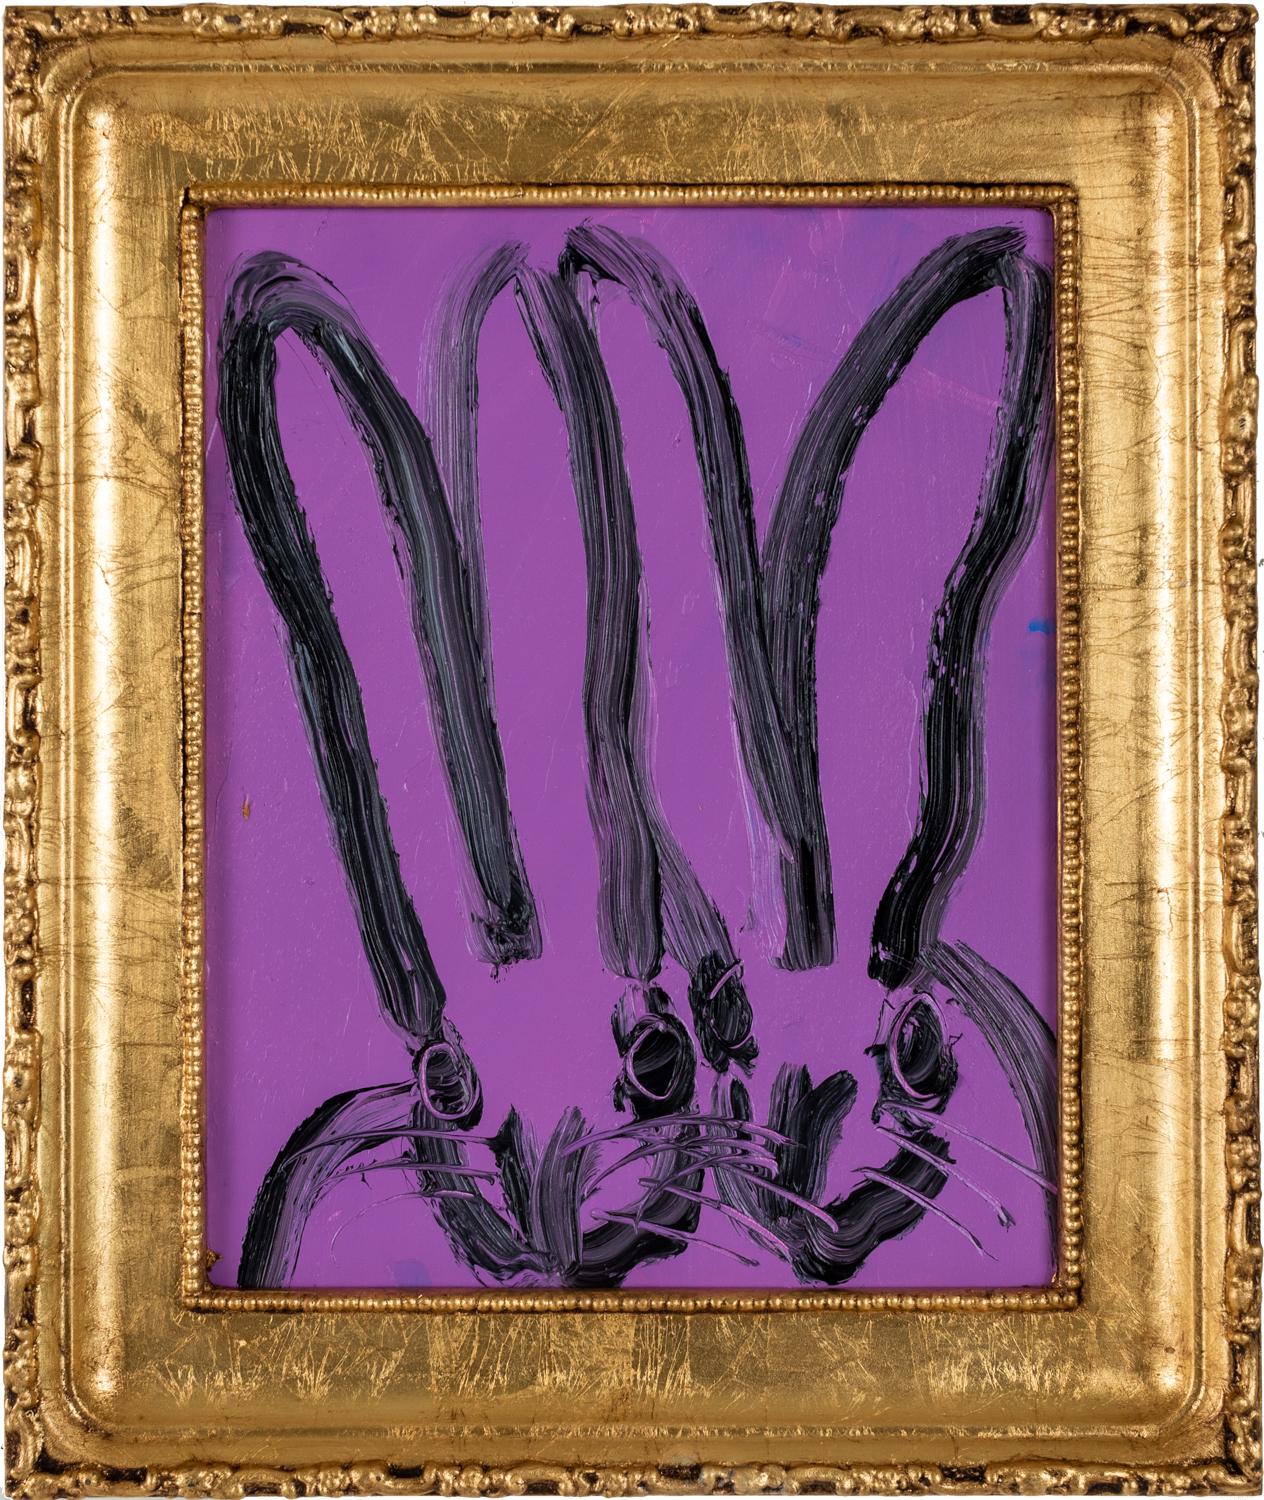 Hunt Slonem "Violets" Double Violet Bunnies
Black outlined bunnies on a violet background in an antique frame

Unframed: 10 x 8 inches
Framed: 13 x 11 inches
*Painting is framed - Please note Hunt Slonem paintings with frames may show signs of